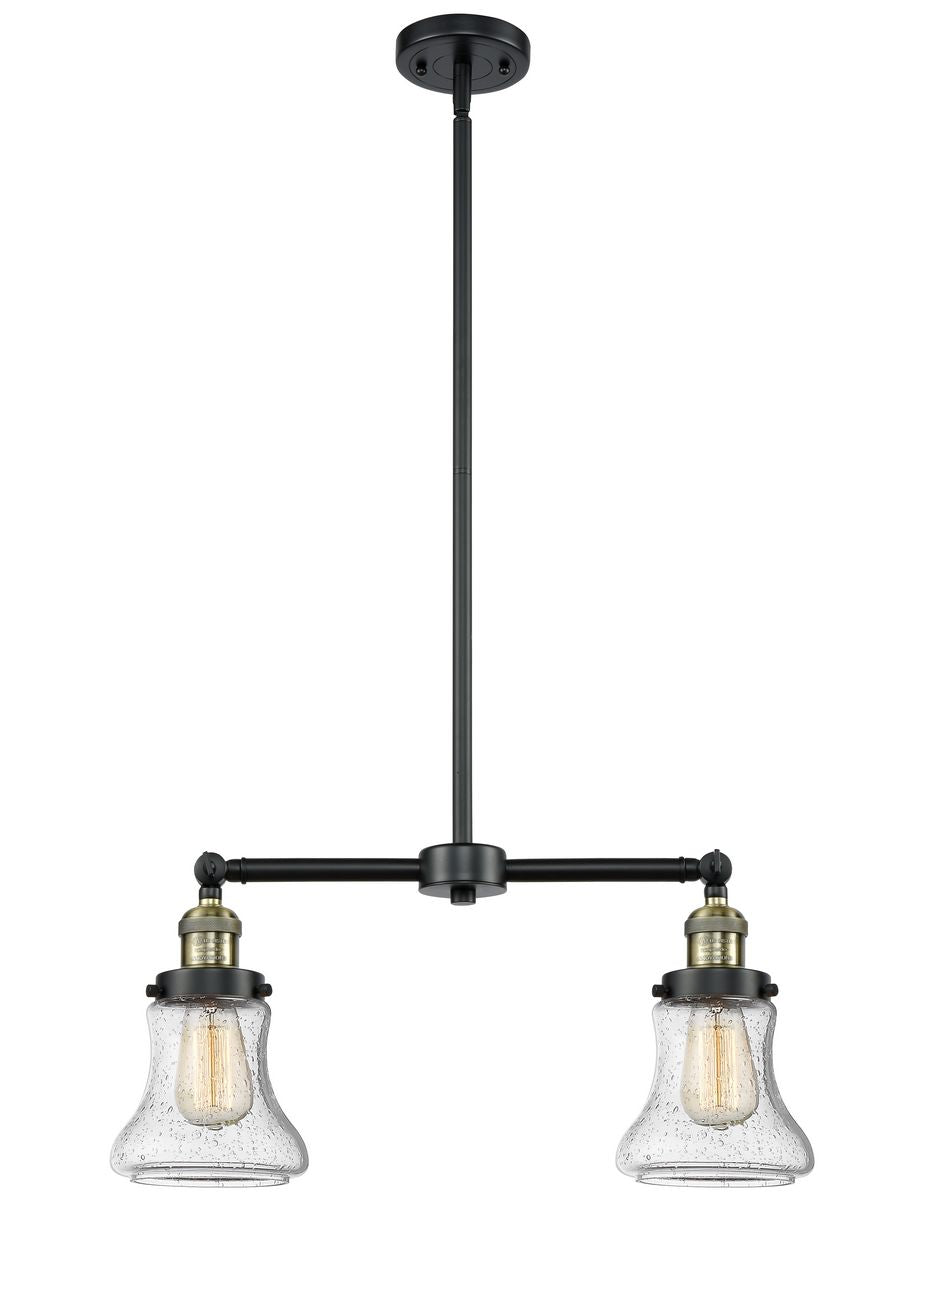 209-BAB-G194 2-Light 21" Black Antique Brass Island Light - Seedy Bellmont Glass - LED Bulb - Dimmensions: 21 x 5 x 10<br>Minimum Height : 21.375<br>Maximum Height : 45.375 - Sloped Ceiling Compatible: Yes